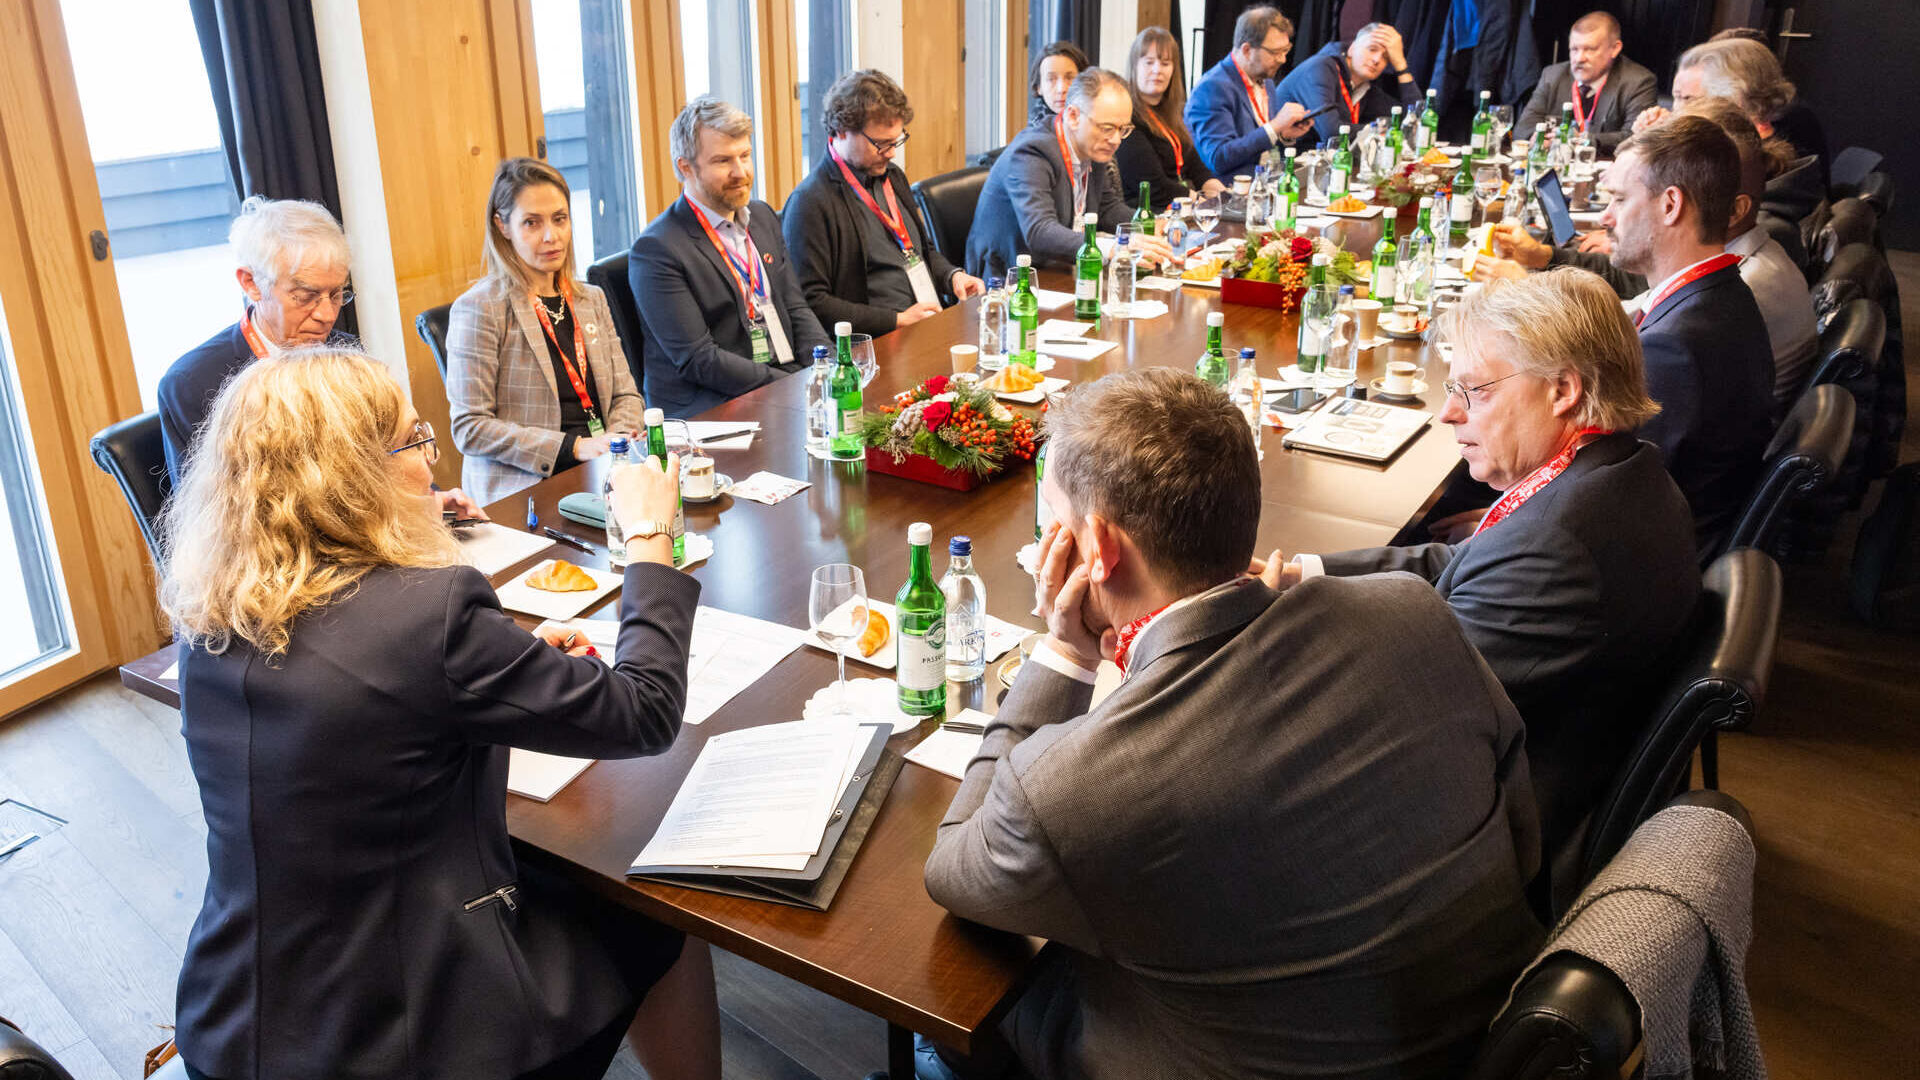 International Computation and AI Network: the meeting of the "Swiss AI Initiative" (launched by the Federal Polytechnics of Zurich and Lausanne and the Swiss Center for Scientific Computing) at the 2024 edition of the World Economic Forum in Davos (Canton of Grisons)